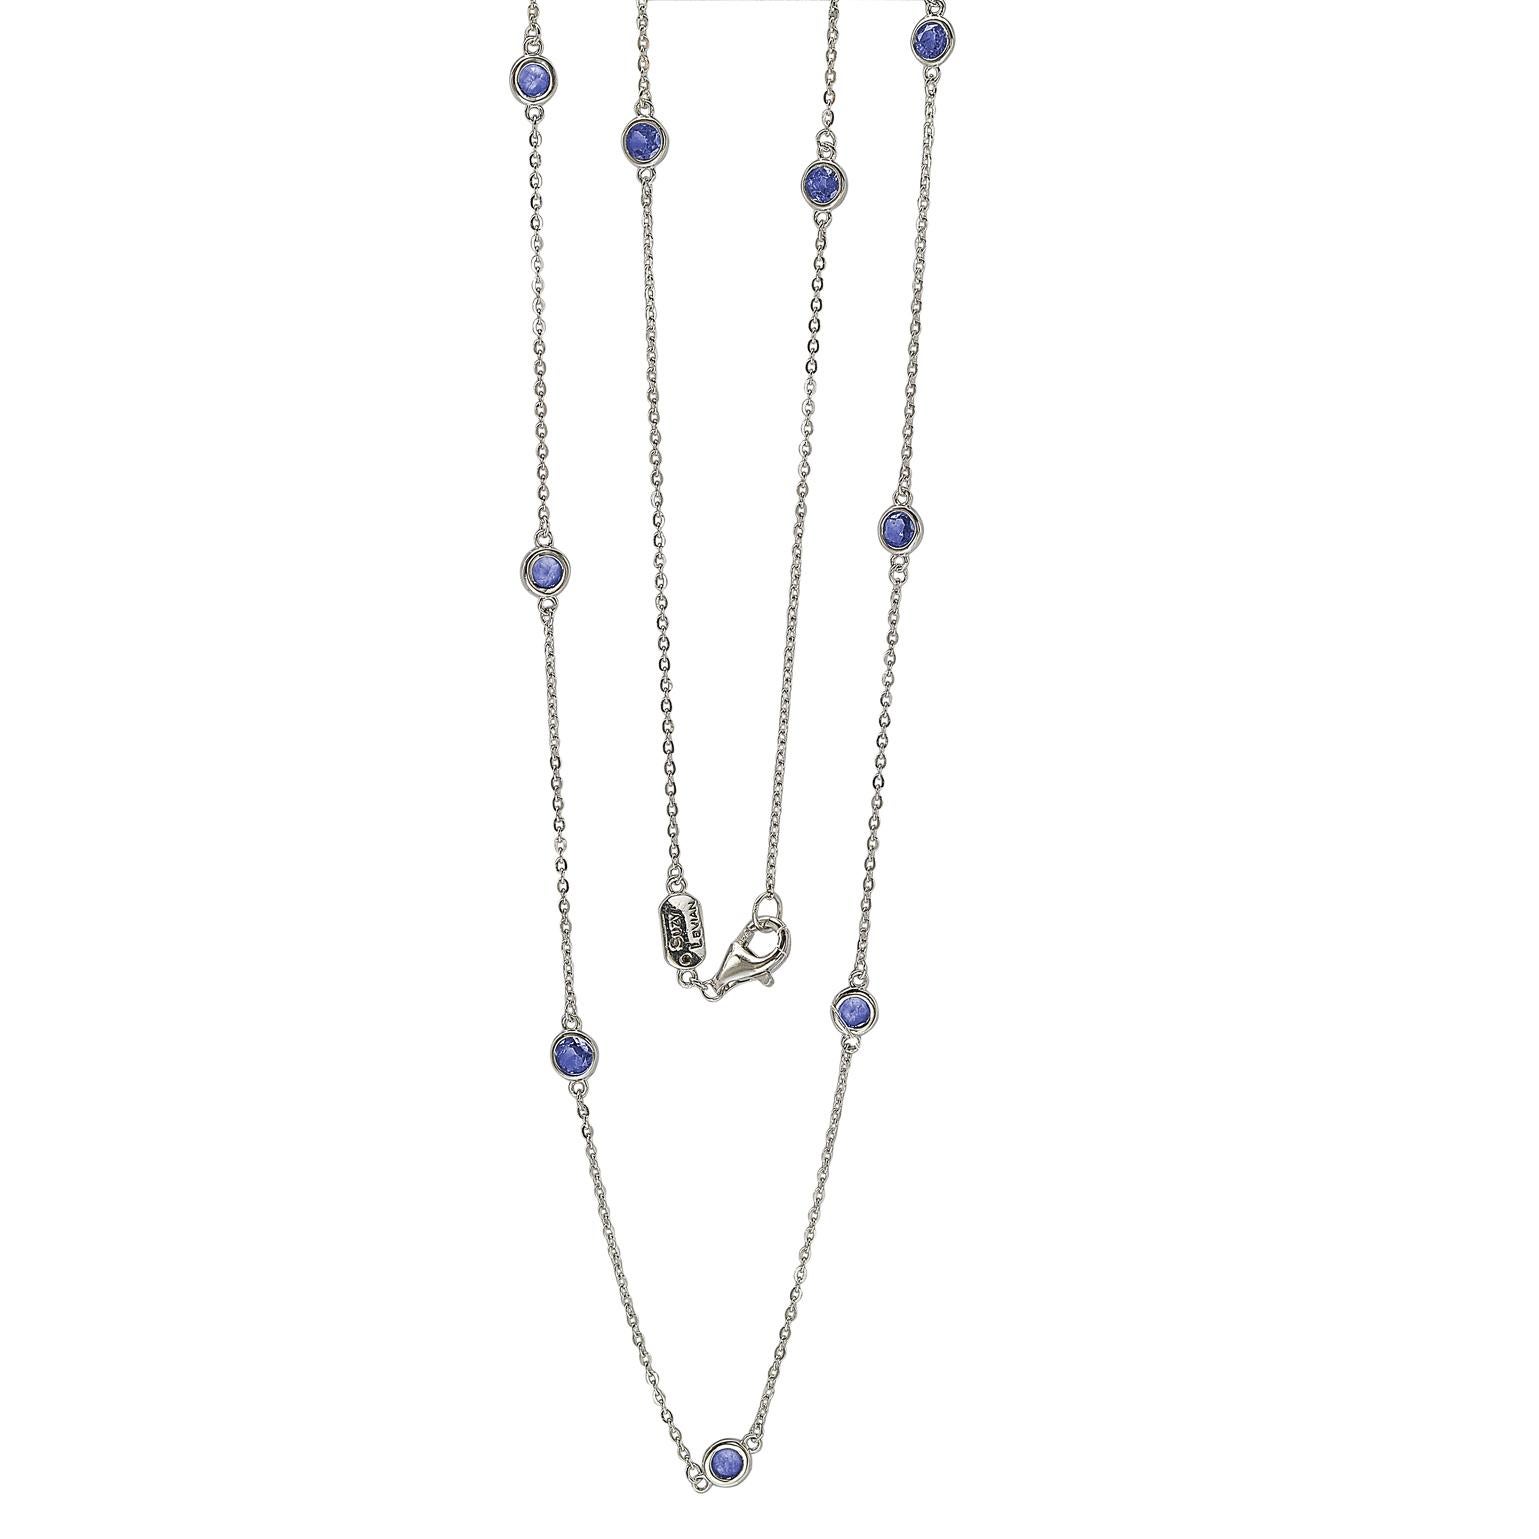 Embrace your neck with sparkling shimmers with this beautiful sapphire station necklace. This necklace can be worn as a stackable with other length necklaces or as a single necklace, making it the perfect necklace for every occasion. This Necklace